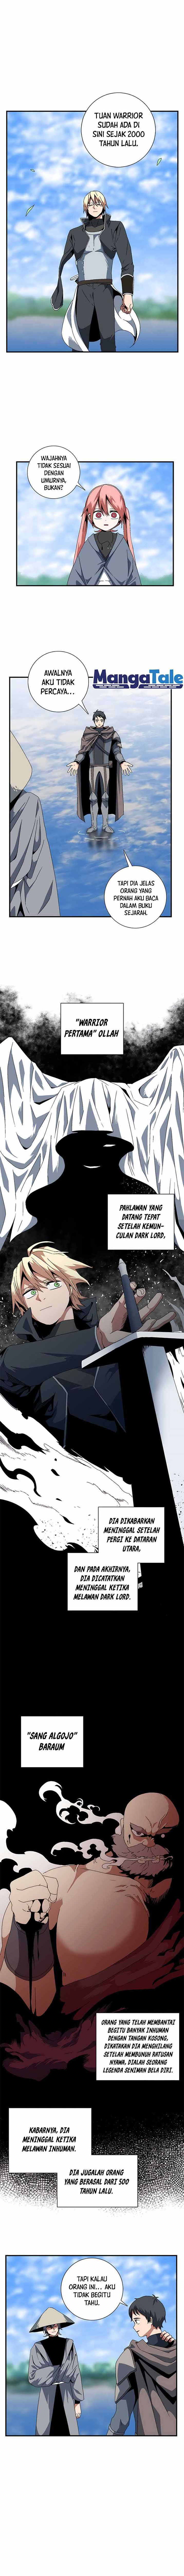 One Step to The Demon King Chapter 10